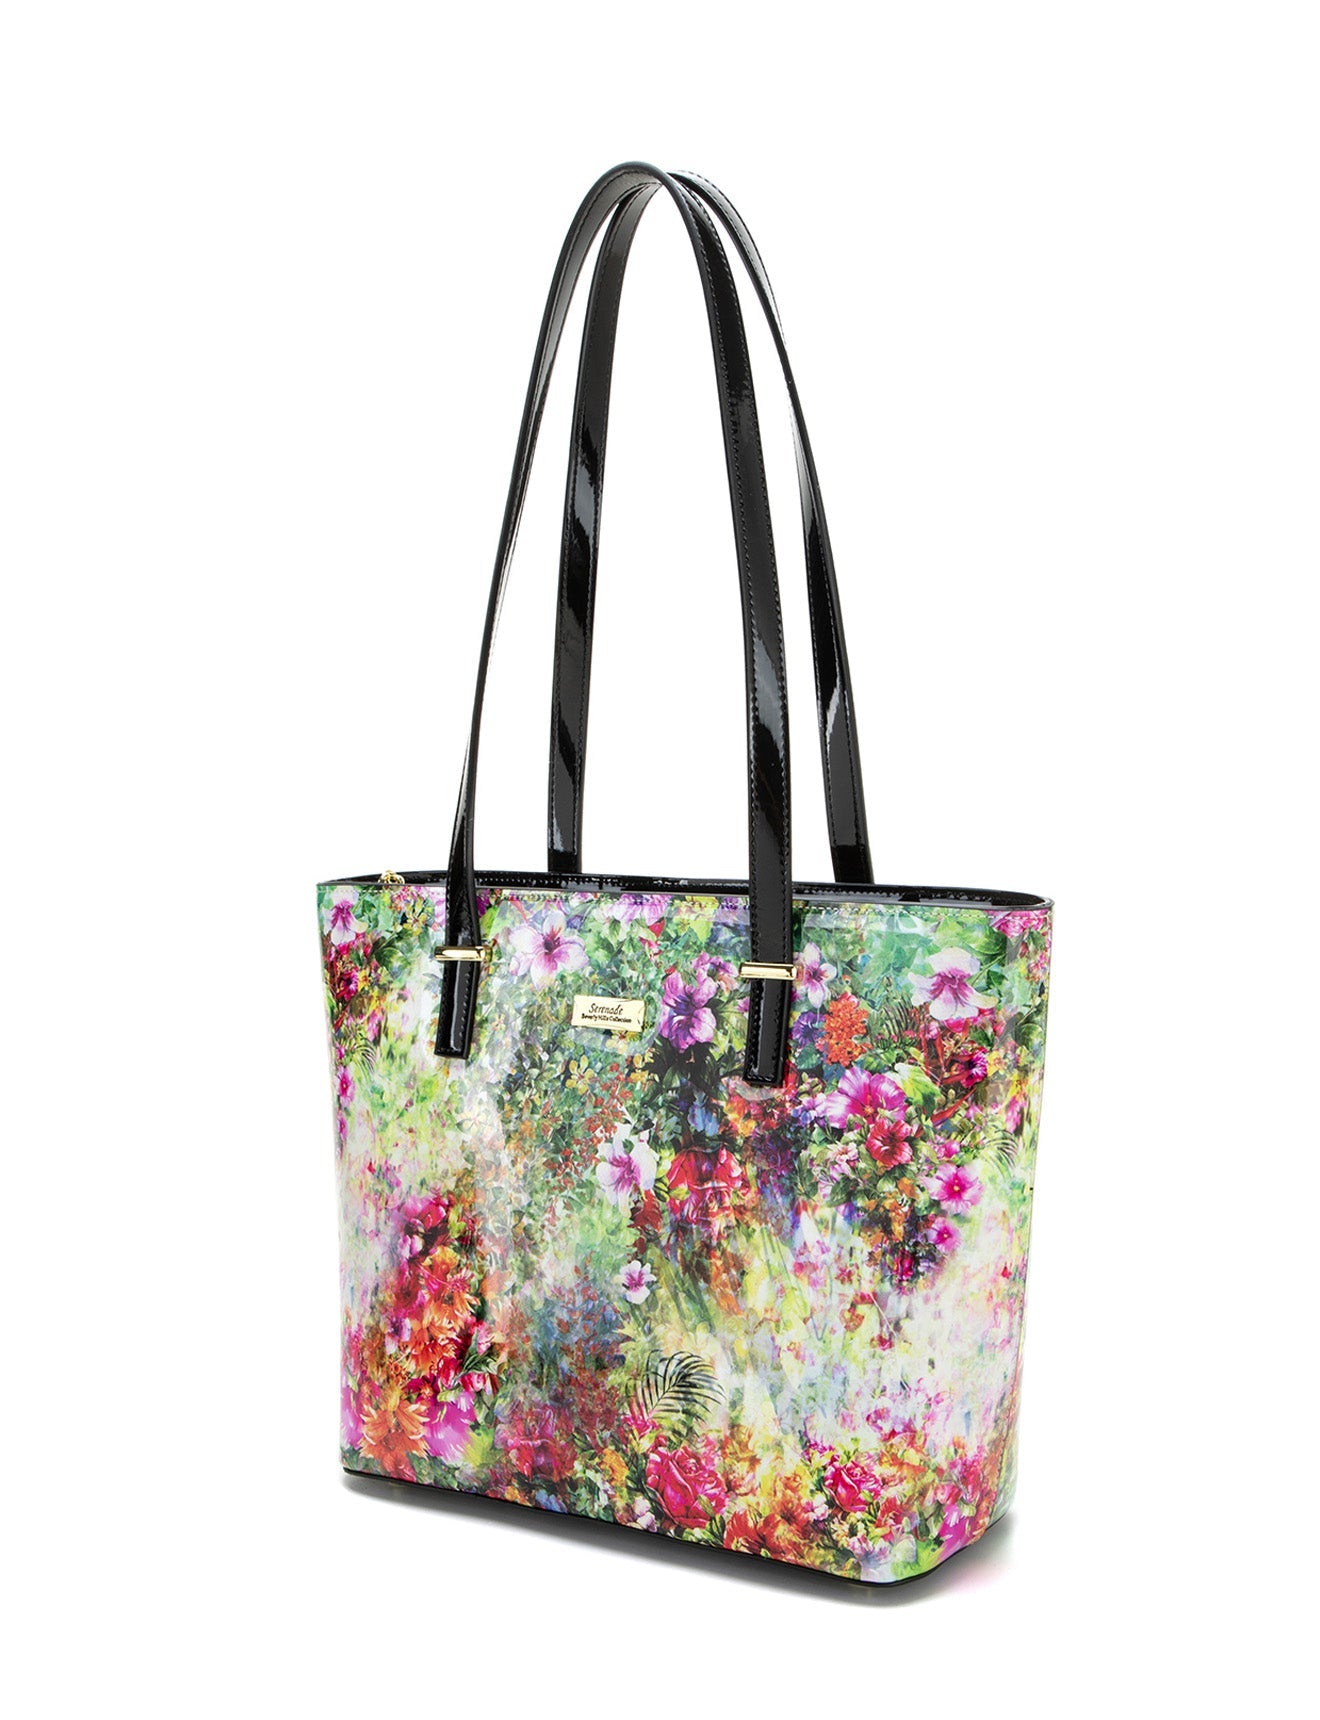 Serenade - SN81-0817 Fiore Large Leather tote - Floral-3